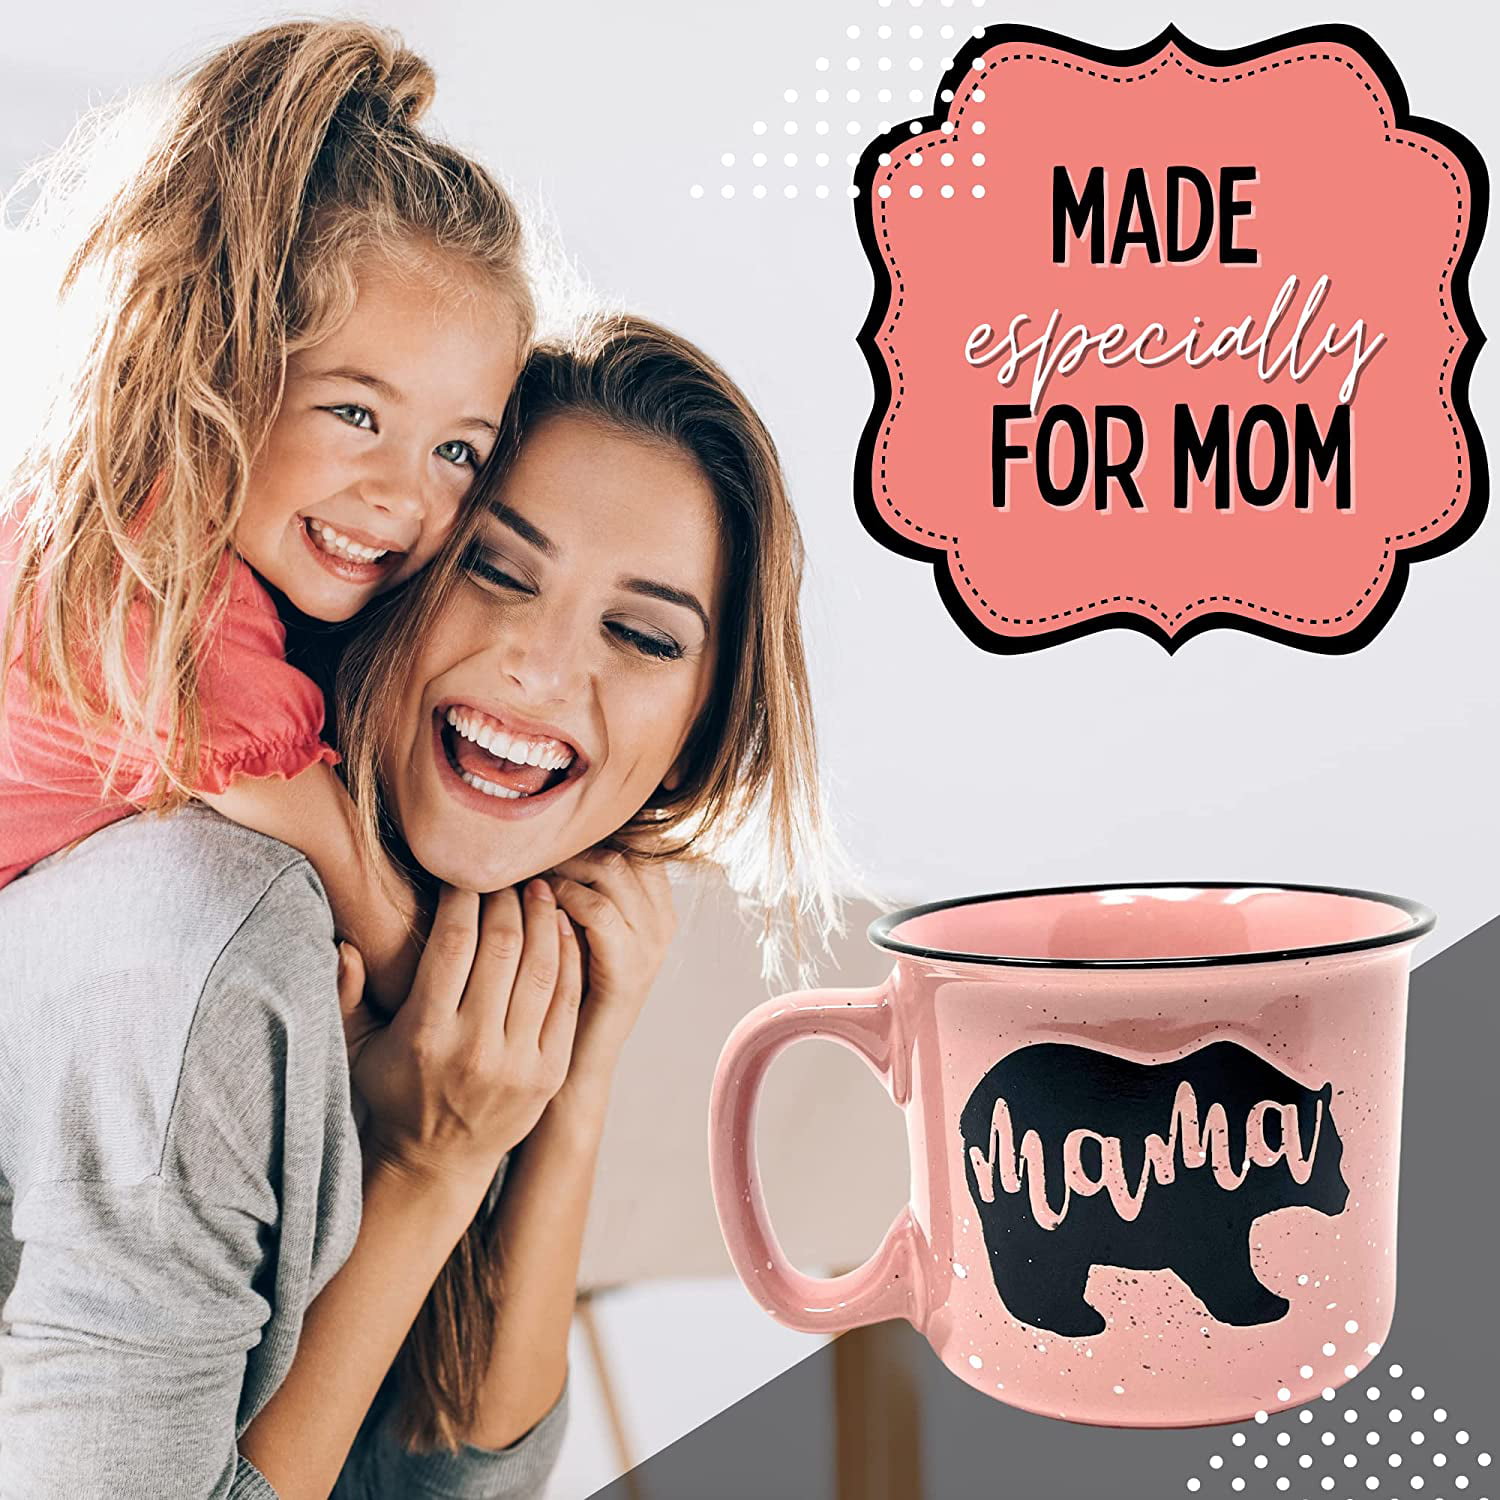 Mama Bear Coffee Mug for Mom, Mother, Wife - Cute Coffee Cups for Women - Unique Fun Gifts for Her, Mother's Day, Christmas (Teal), Size: 14 oz, Blue